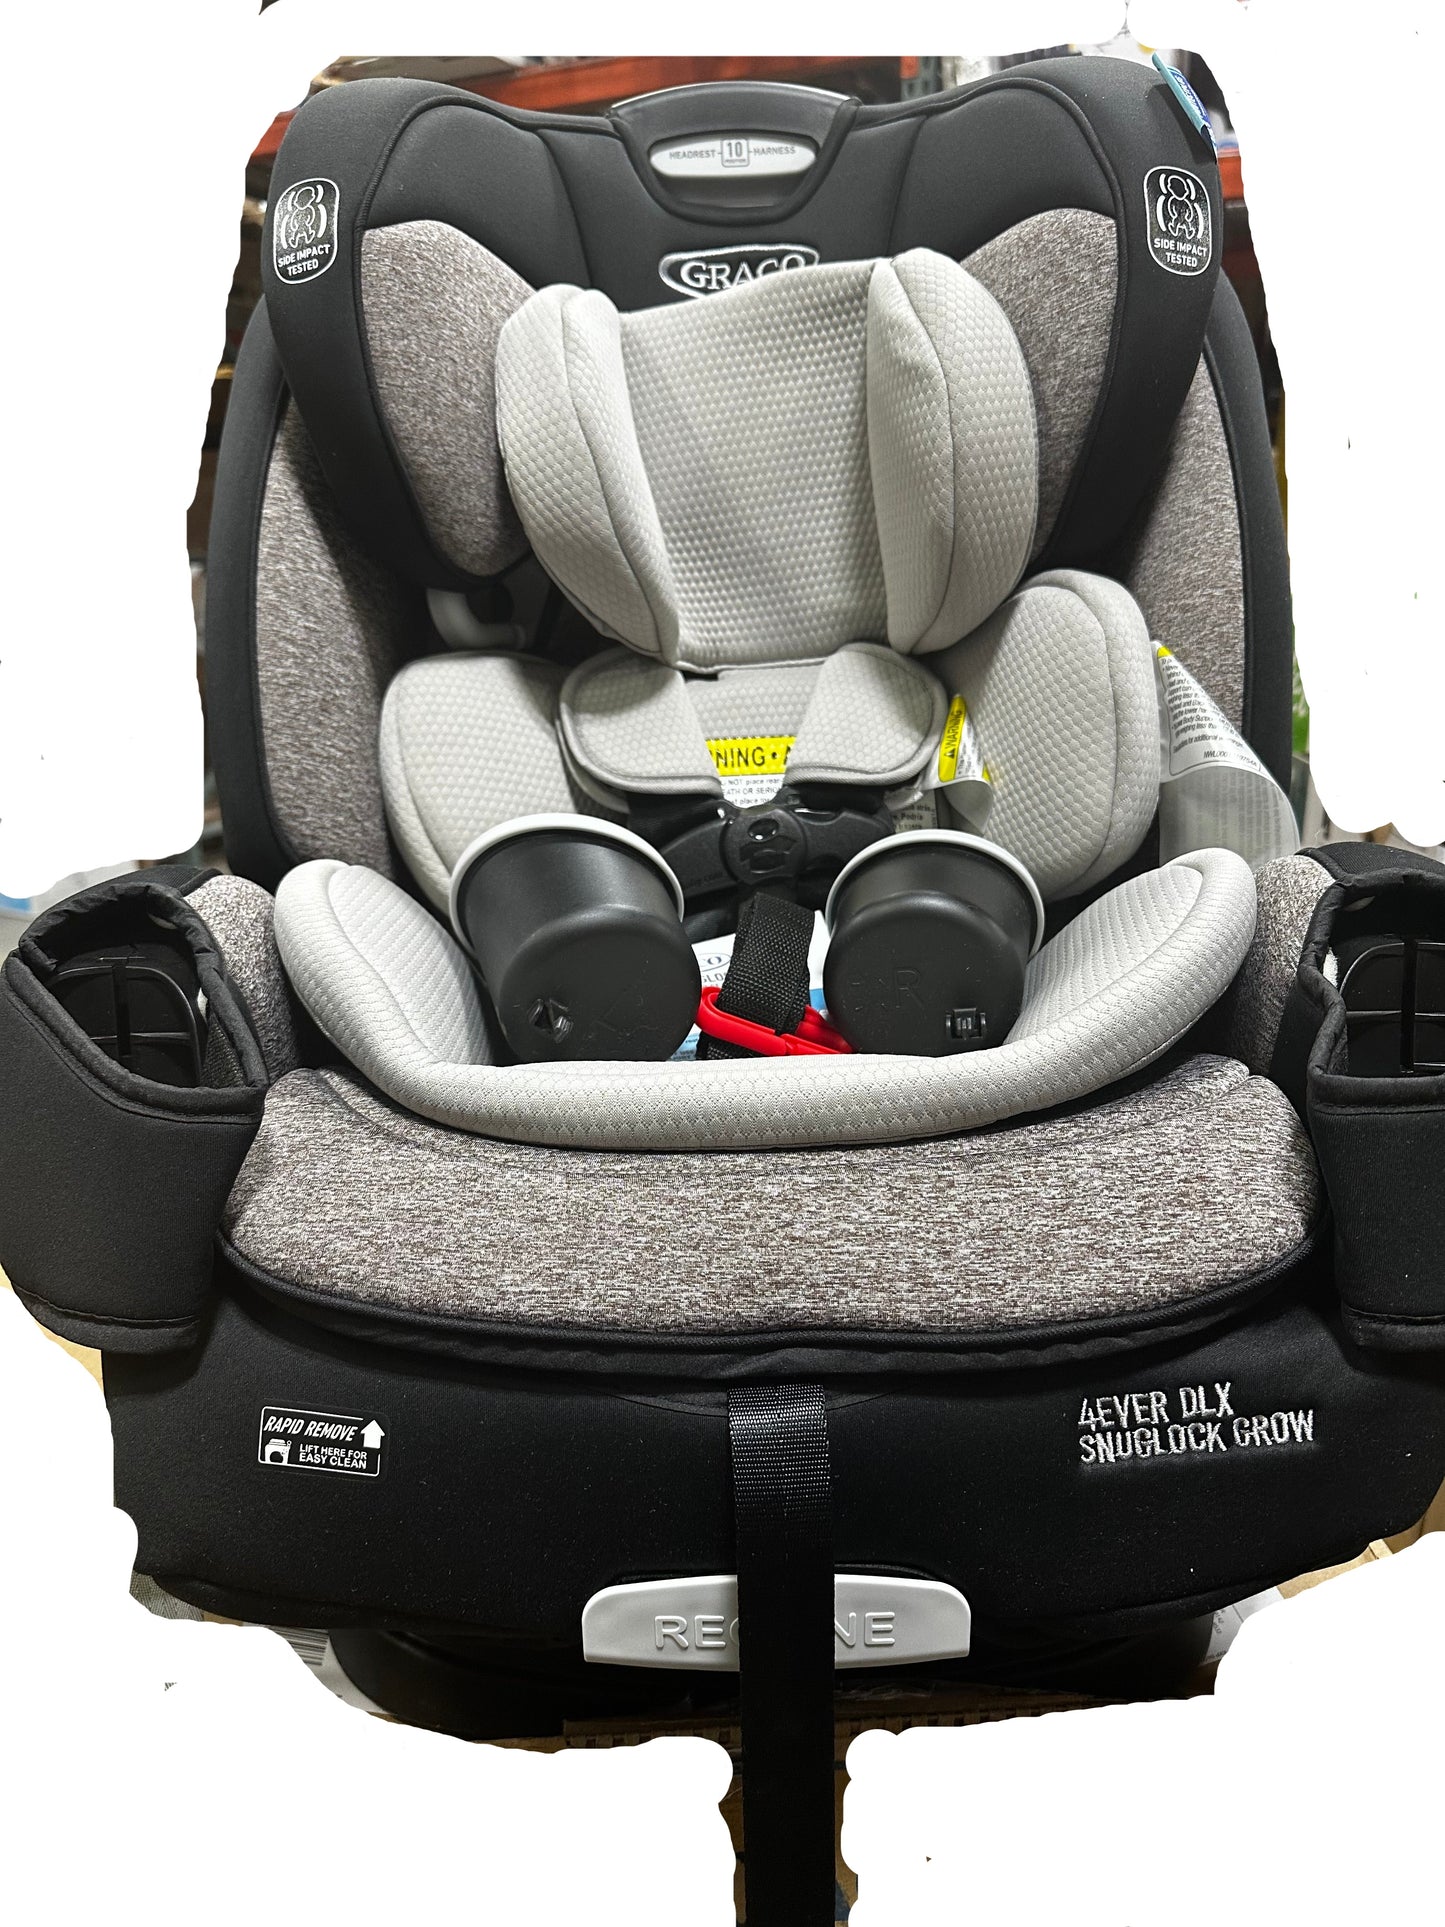 Graco 4Ever DLX SnugLock Grow 4-in-1 Car Seat, Henry (05/2022)